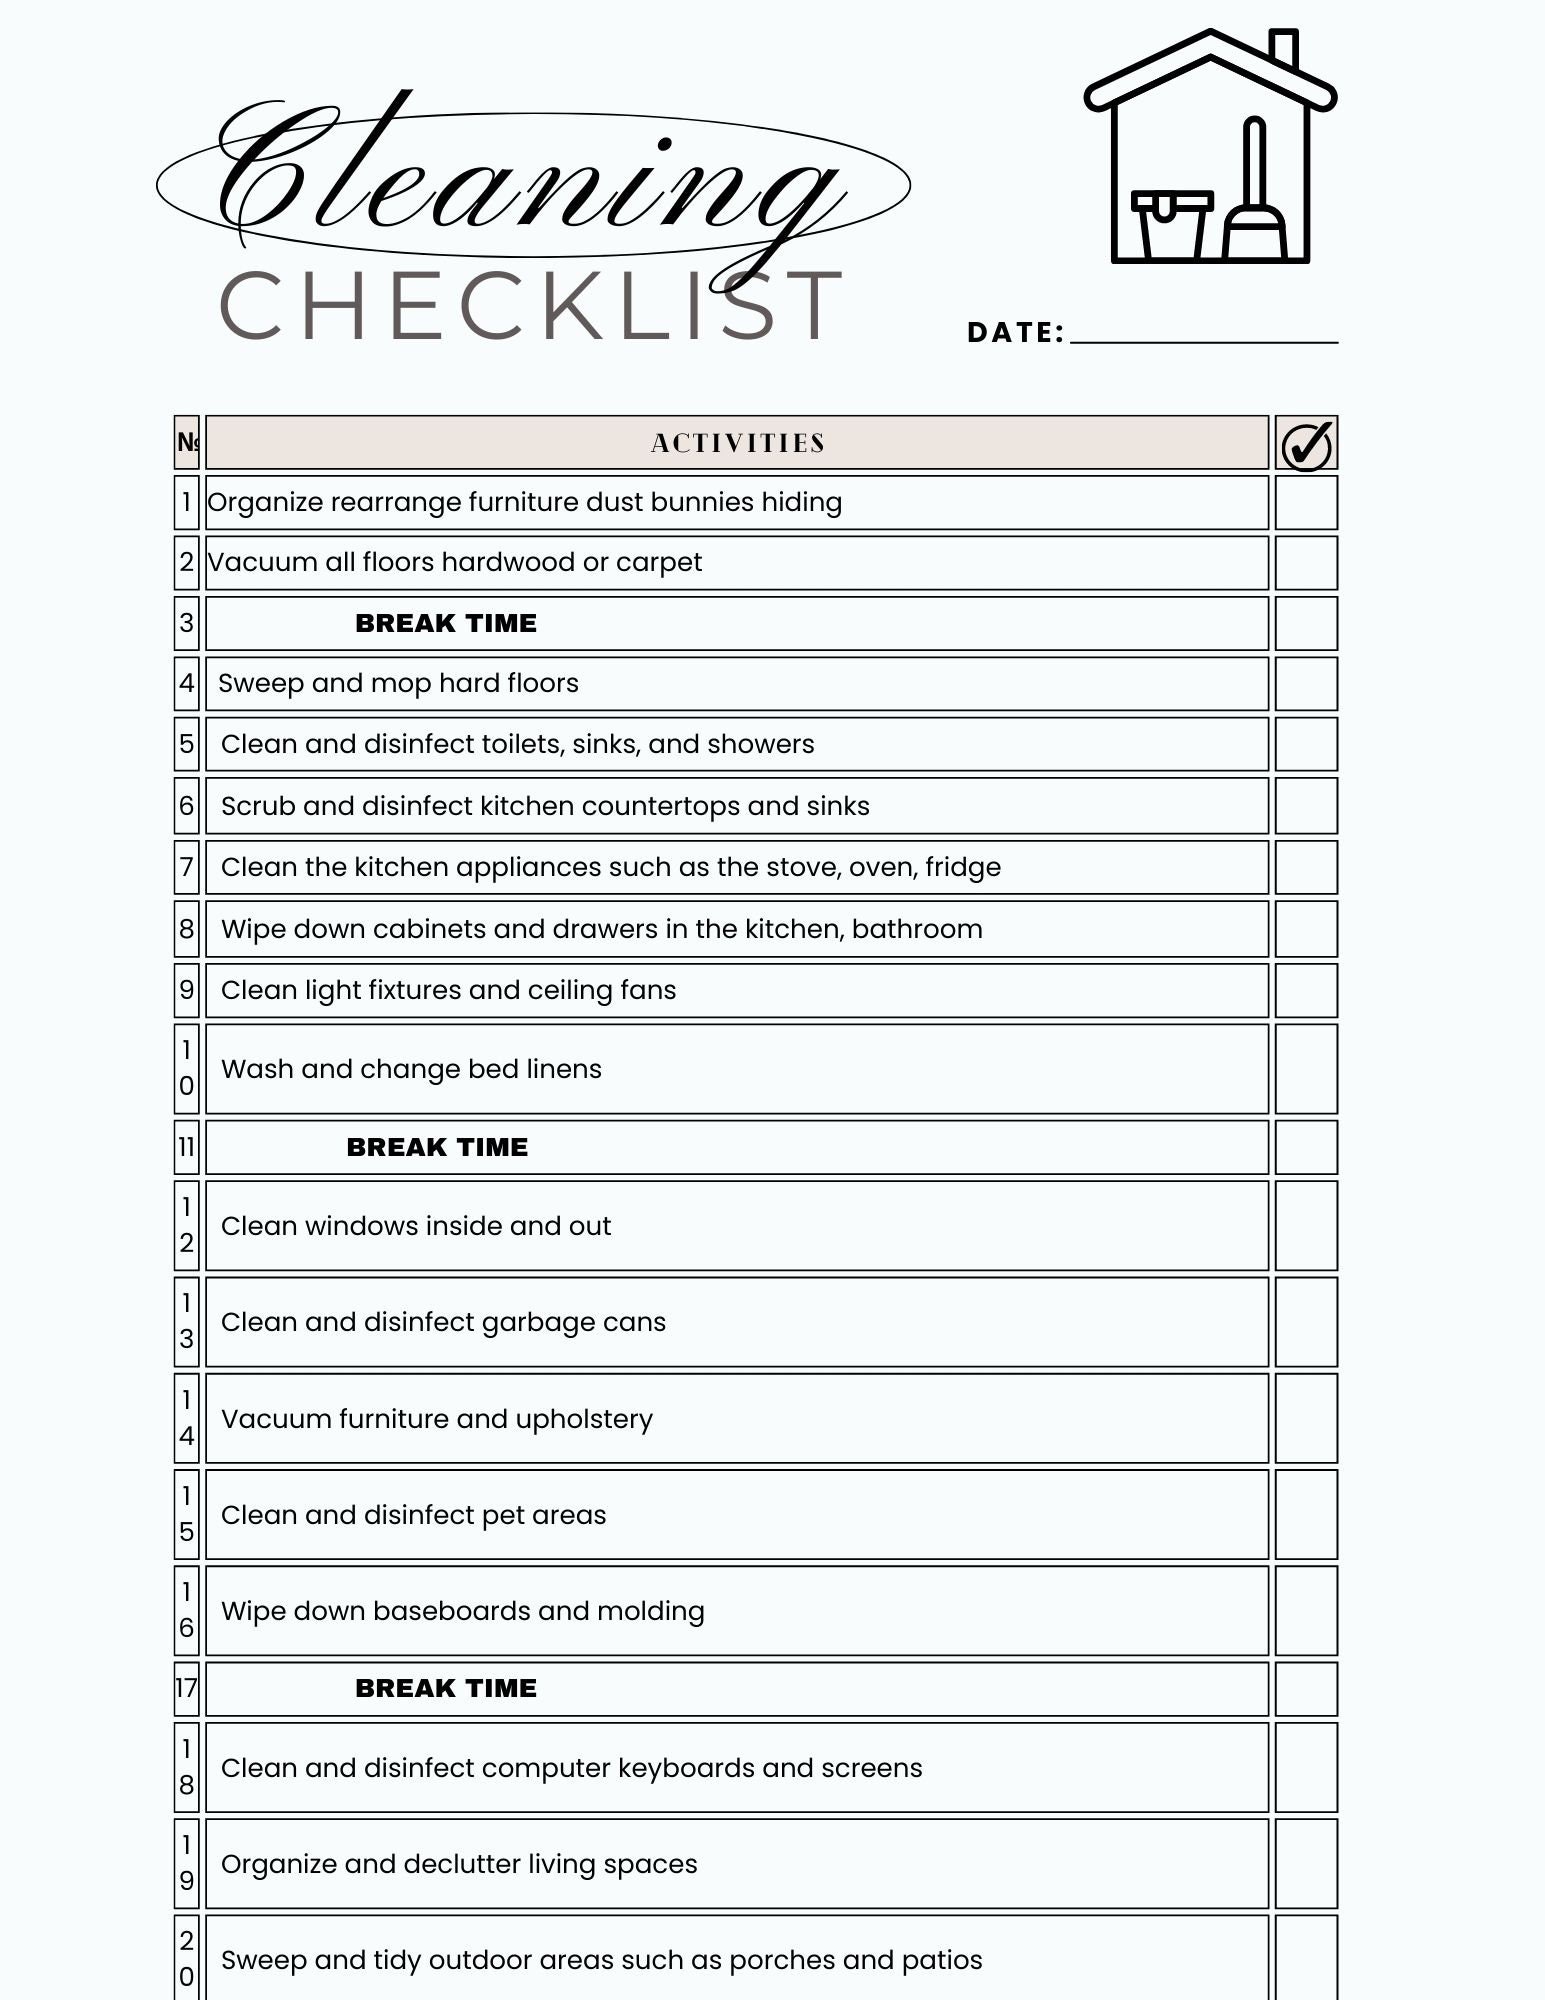 Cleaning Checklist - Etsy